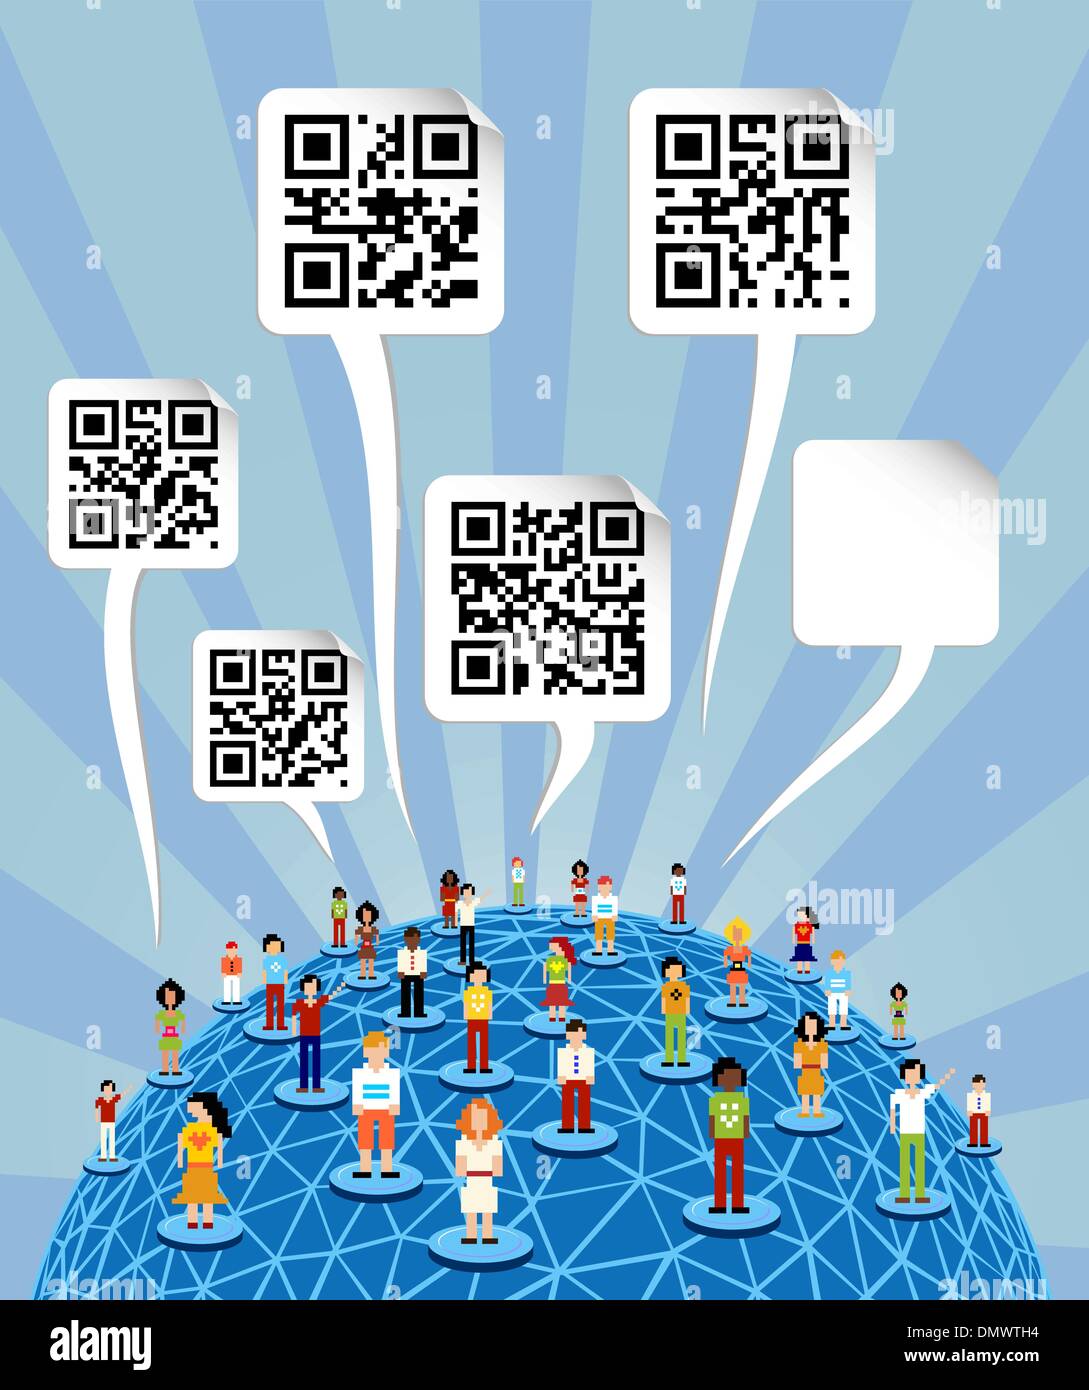 Global social media World with QR codes signs Stock Vector